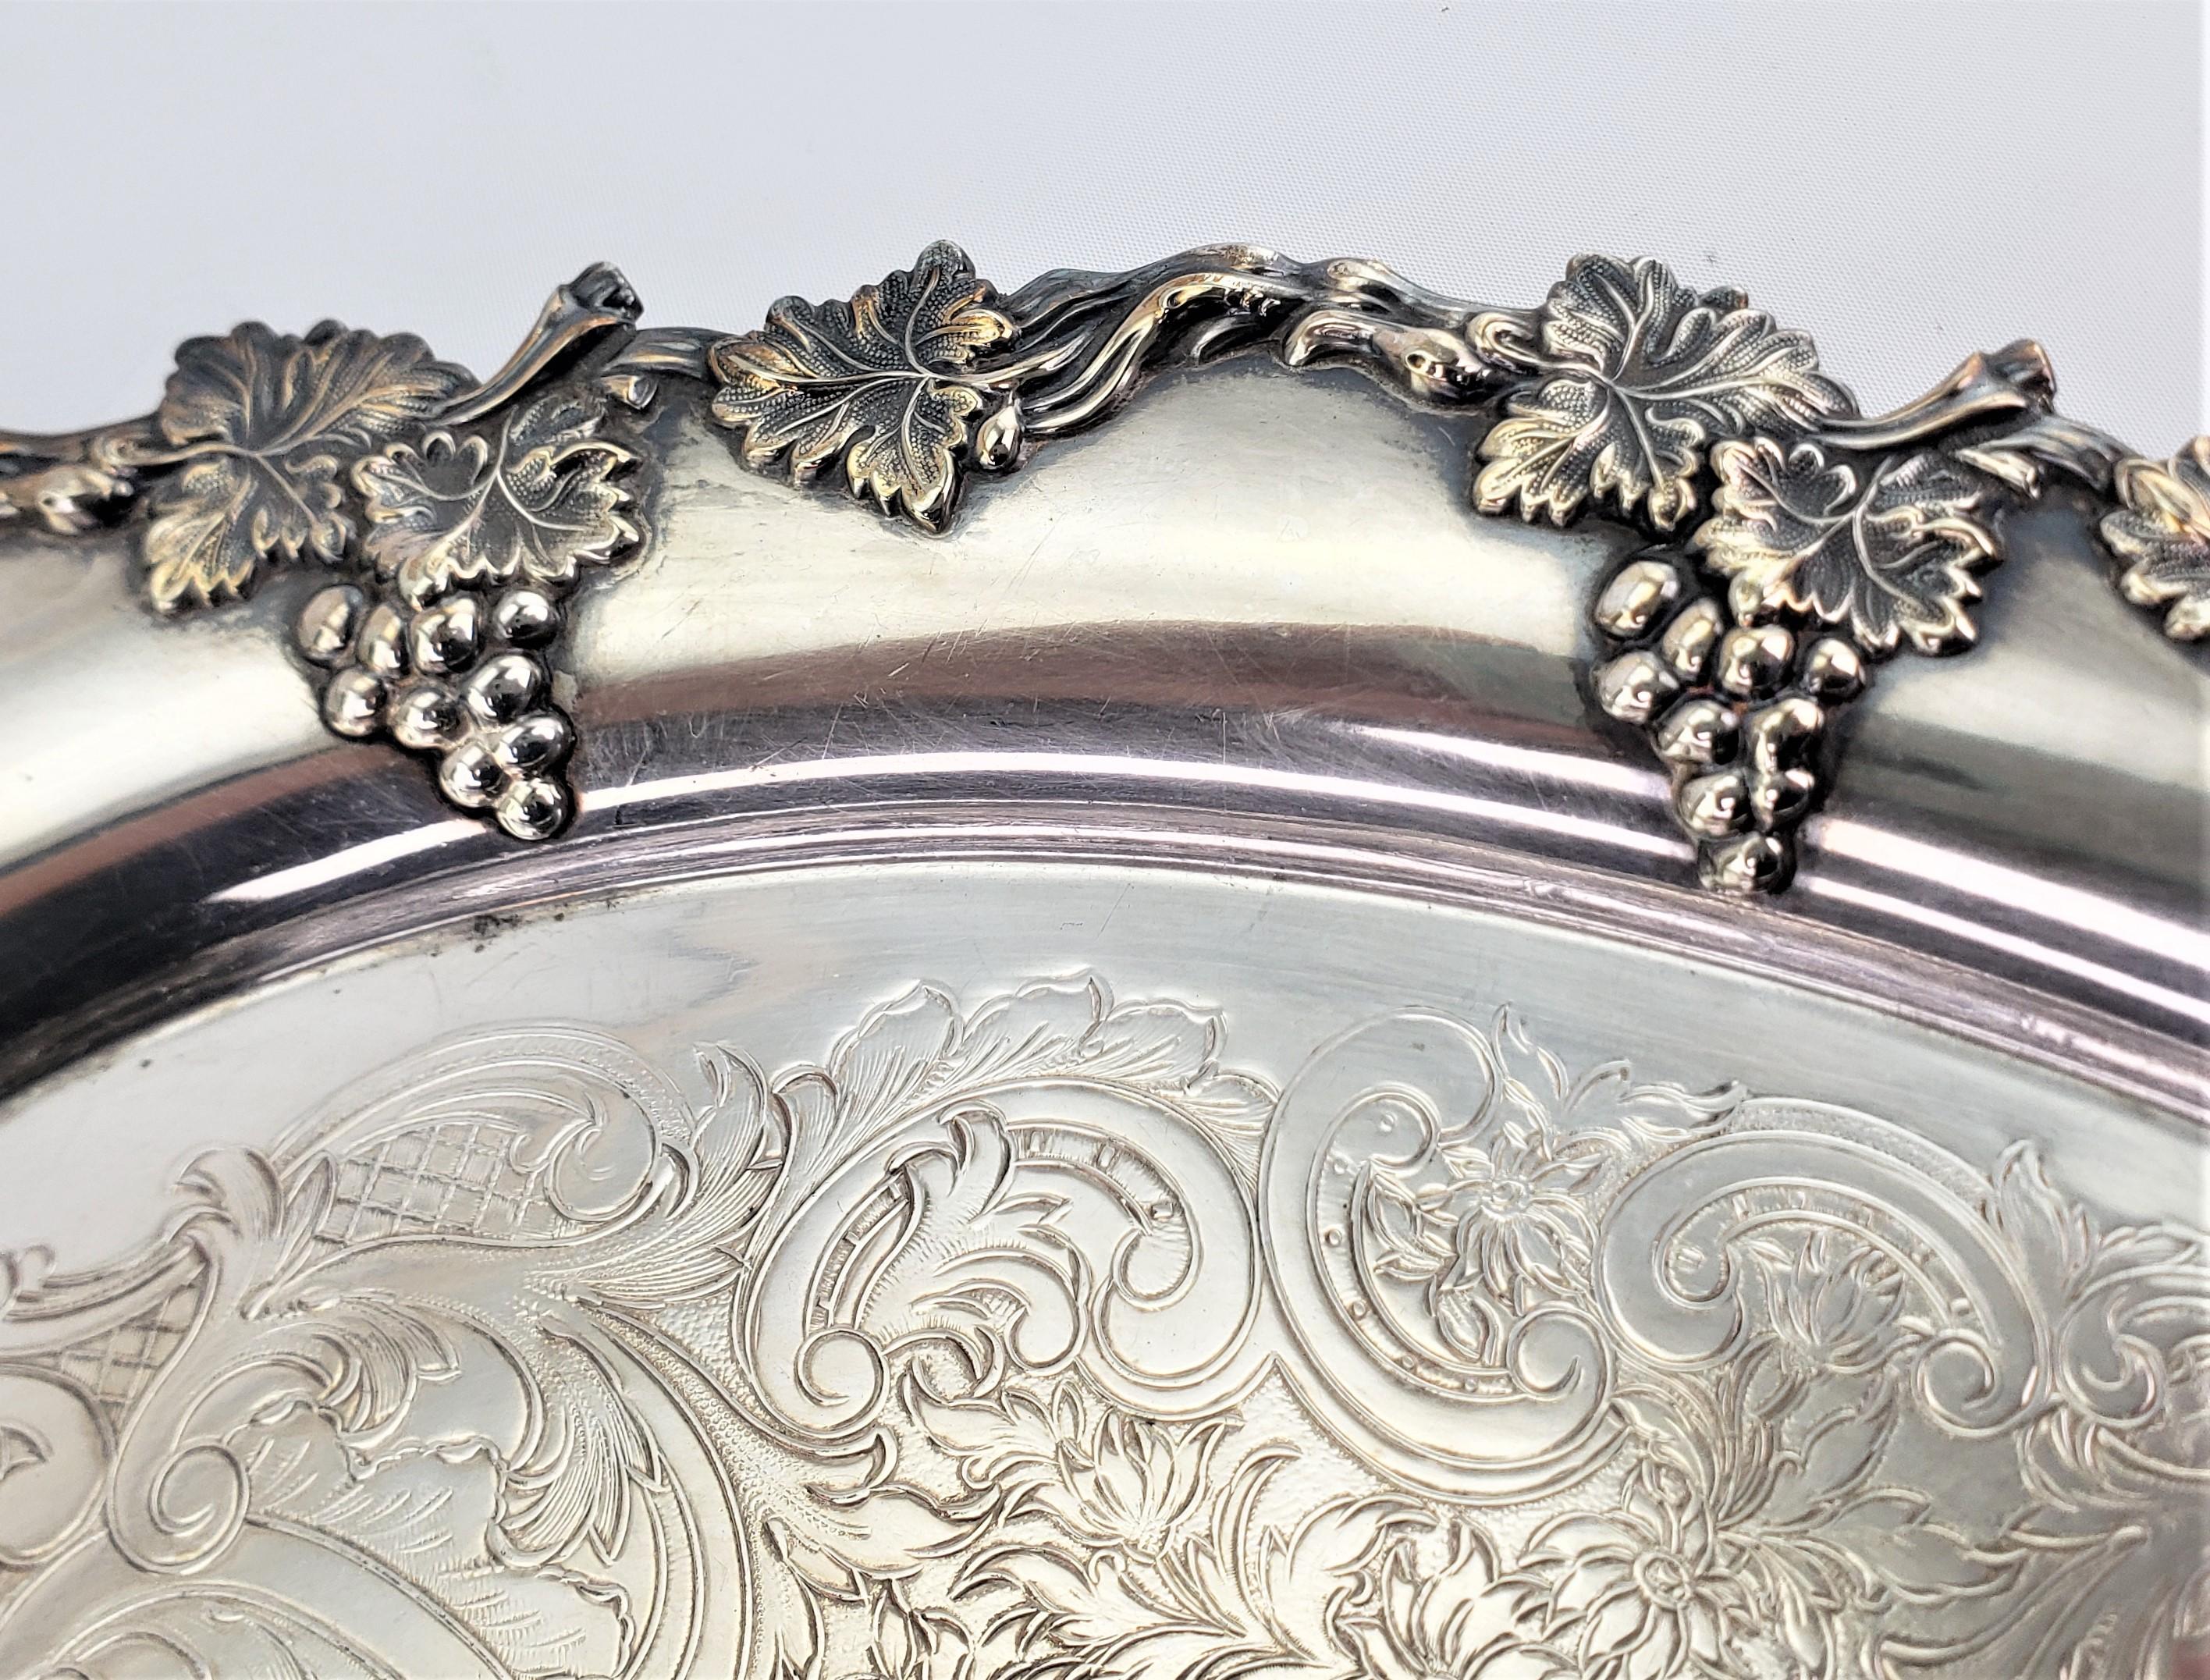 Machine-Made Antique Oval English Silver Plated Serving Tray with Grape and Leaf Decoration